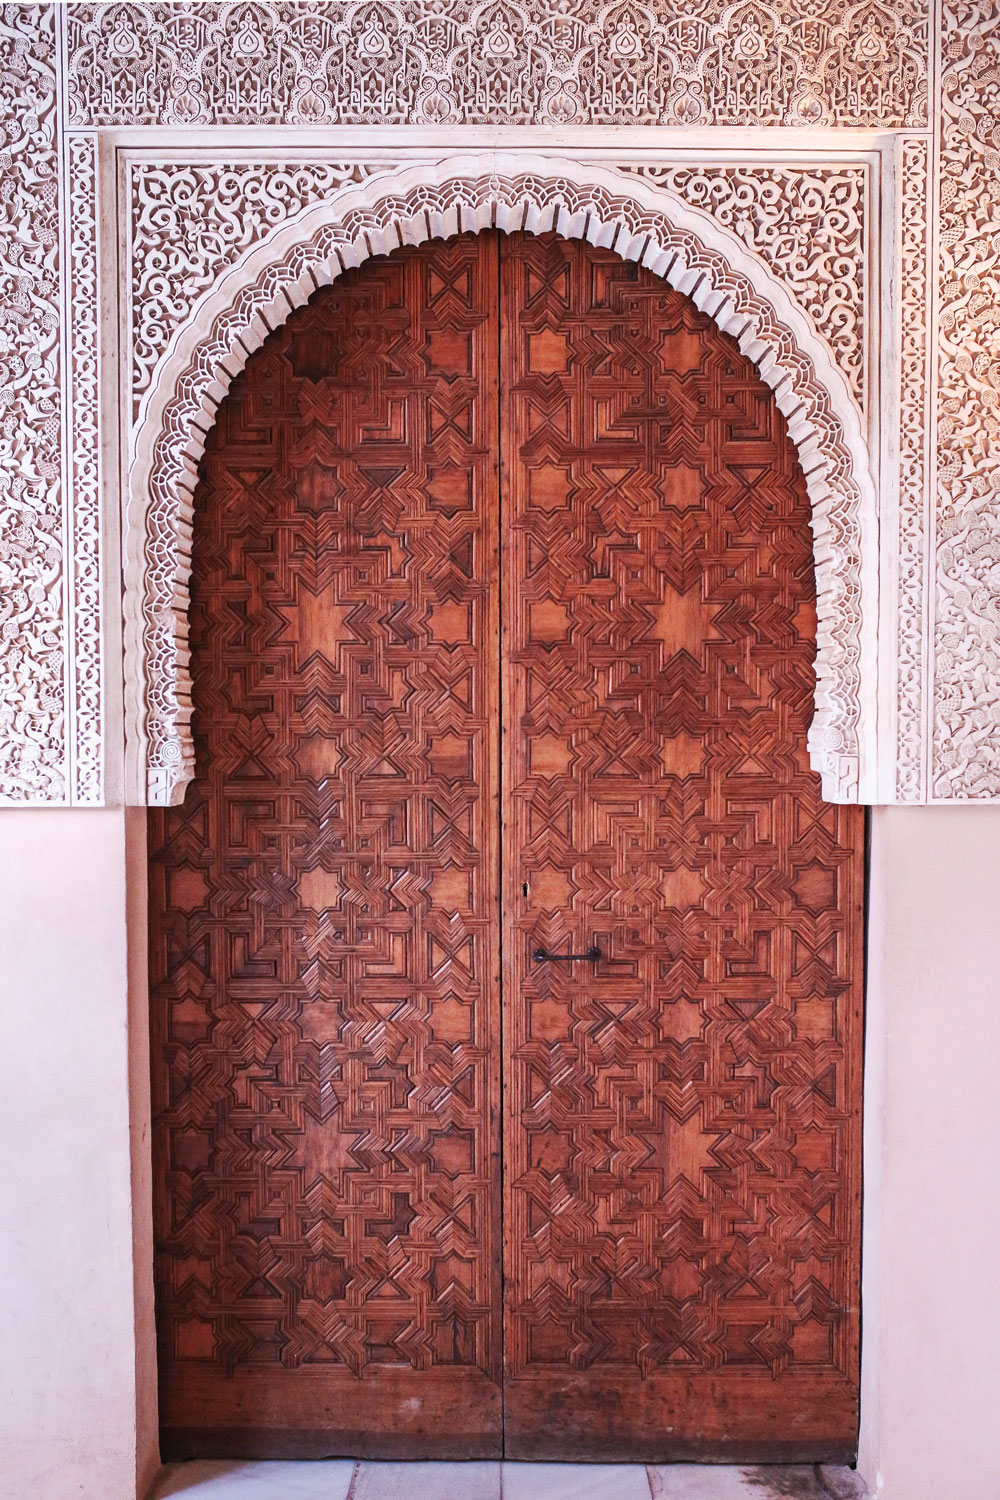 Best moorish architecture in spain by To Vogue or Bust